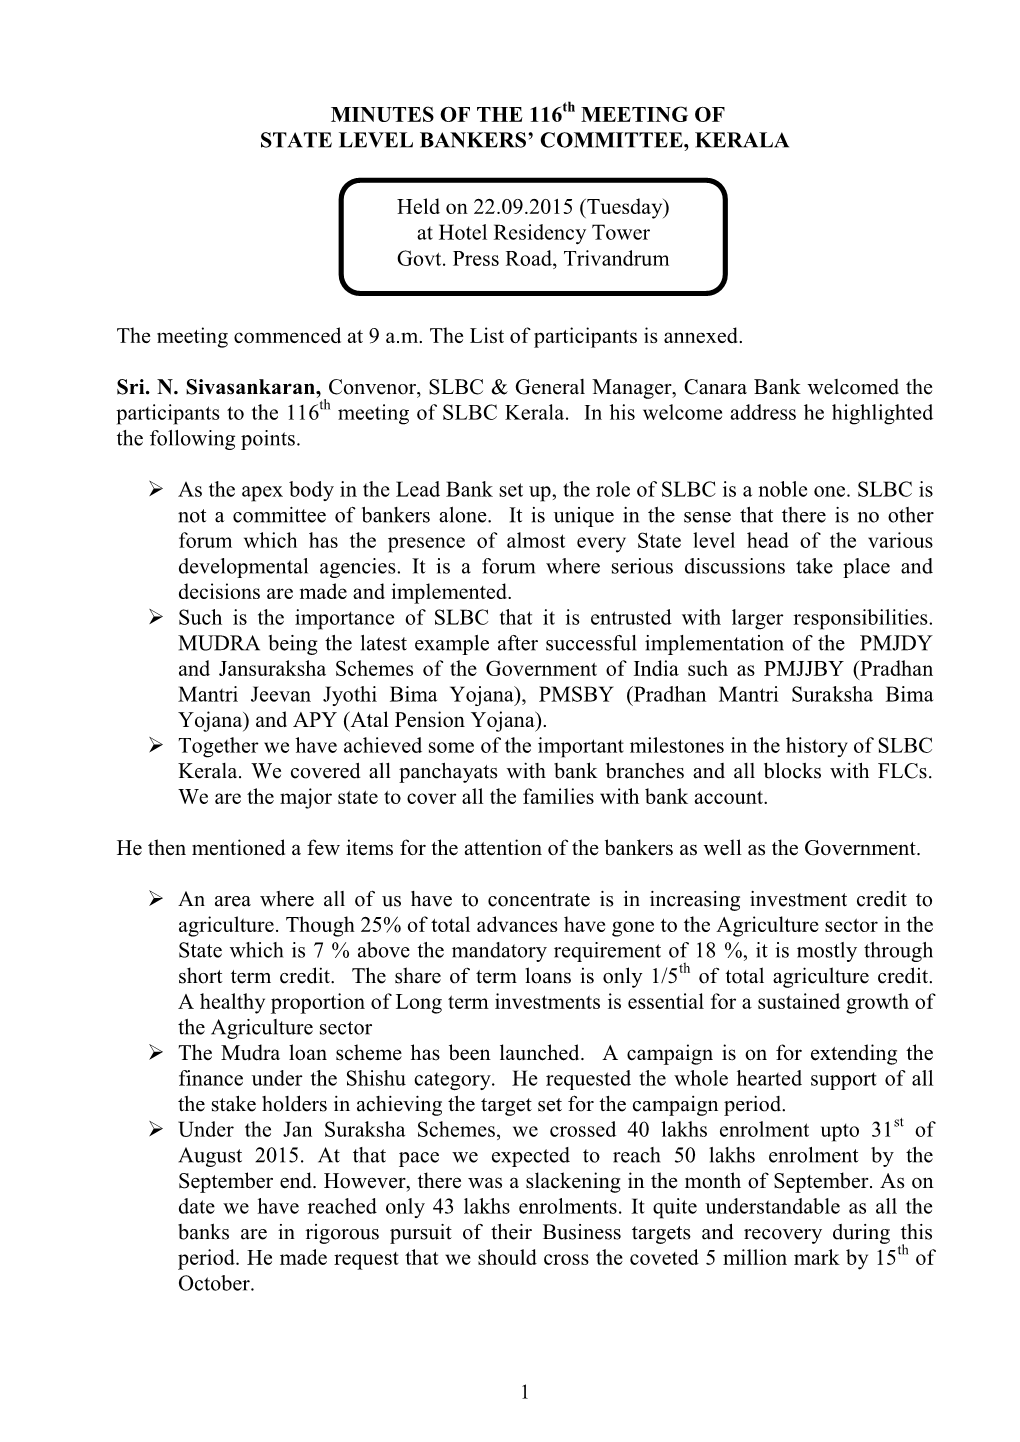 MINUTES of the 116Th MEETING of STATE LEVEL BANKERS’ COMMITTEE, KERALA